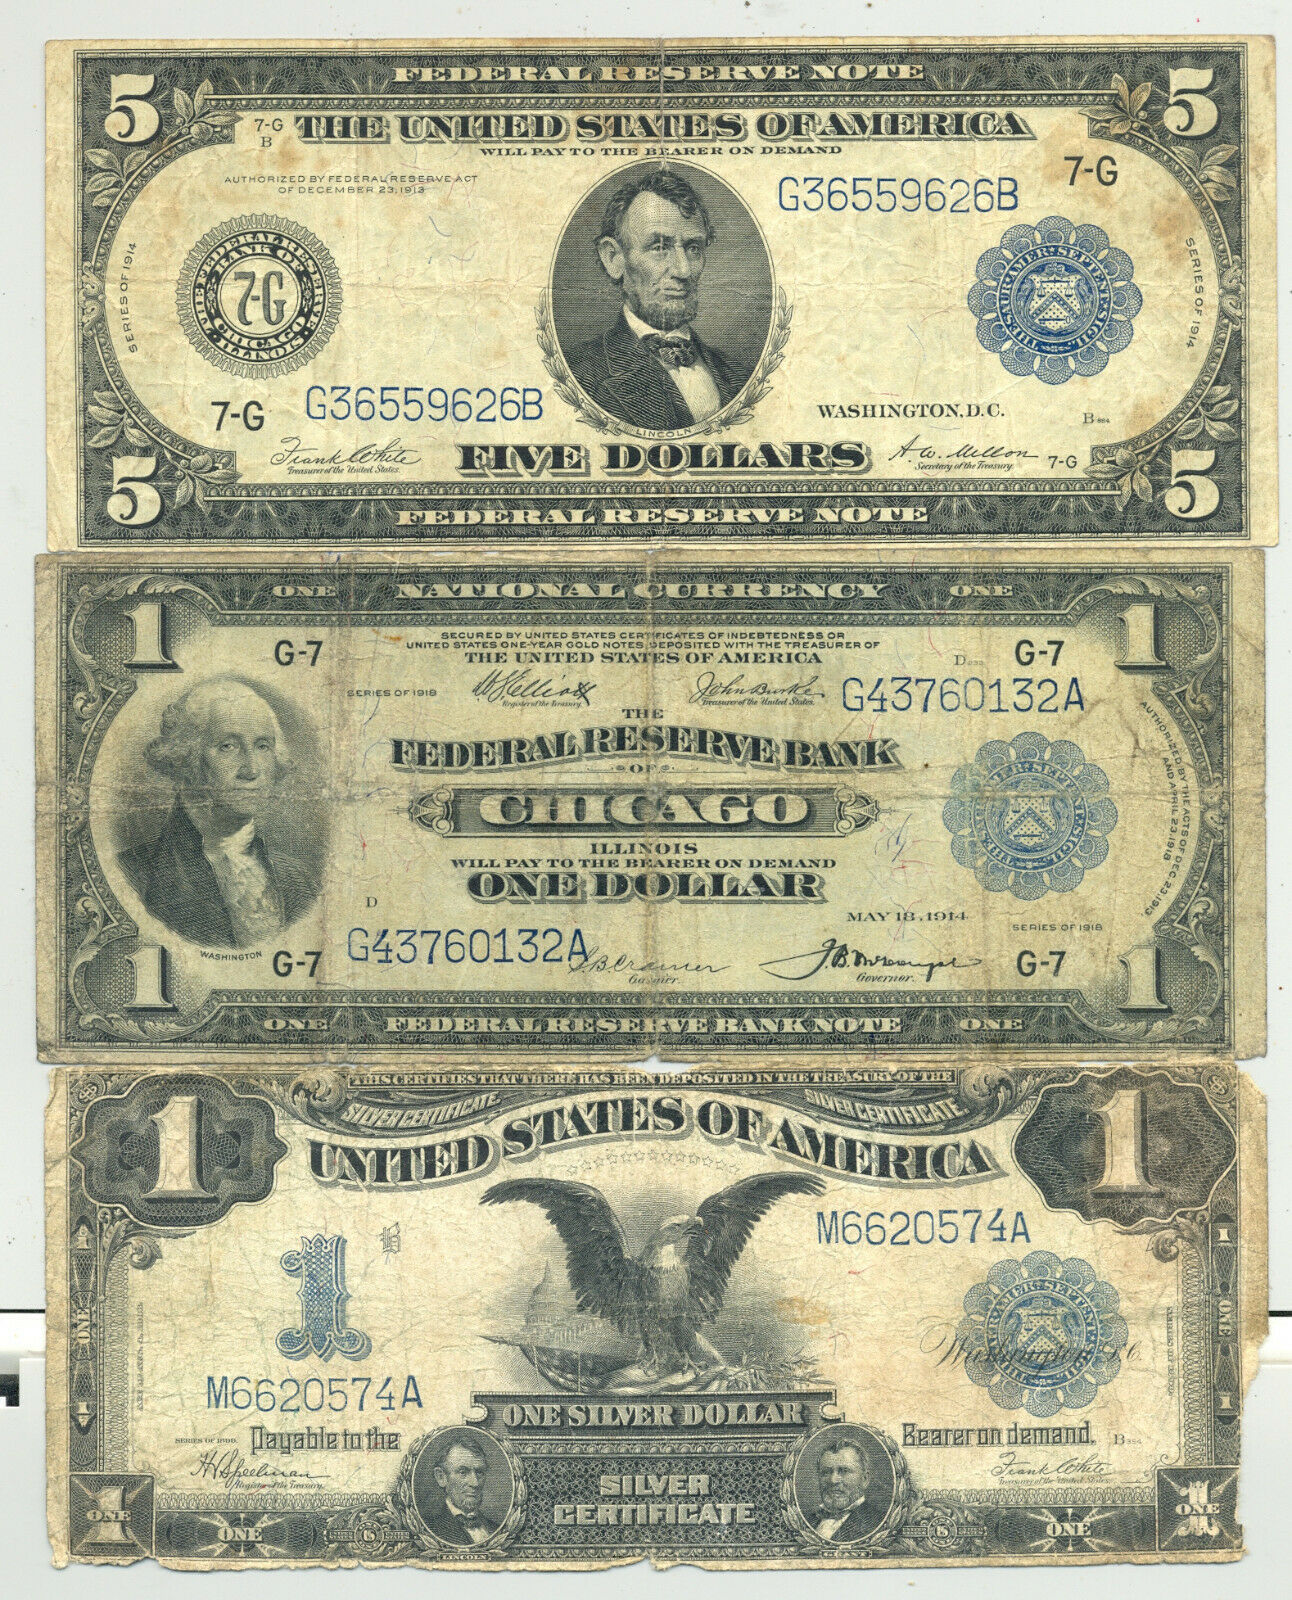 $5 1914 Federal Reserve Note, $1 1918 Frbn, And $1 1899 Silver Certificate